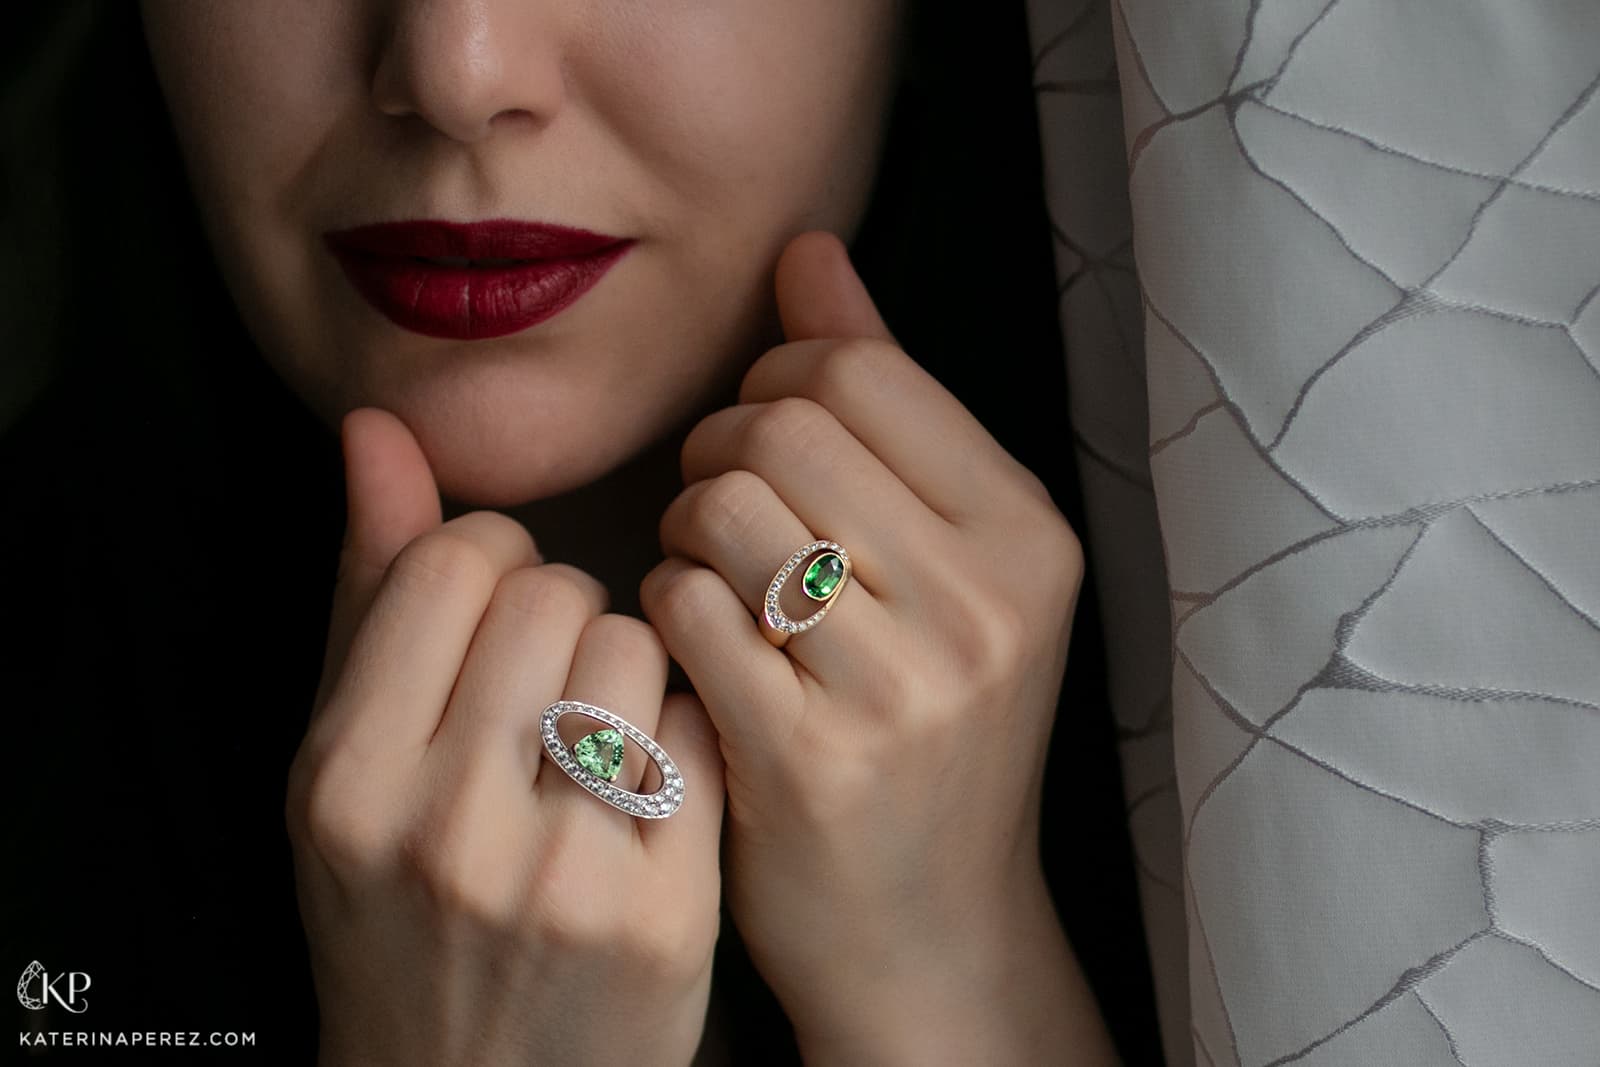 The Afghan tourmaline and diamond ‘Orbital’ ring by Maison Alix Dumas (left) and the ‘Excentric’ ring (right) with a Kenyan tsavorite garnet of 1.51 carats surrounded by diamonds